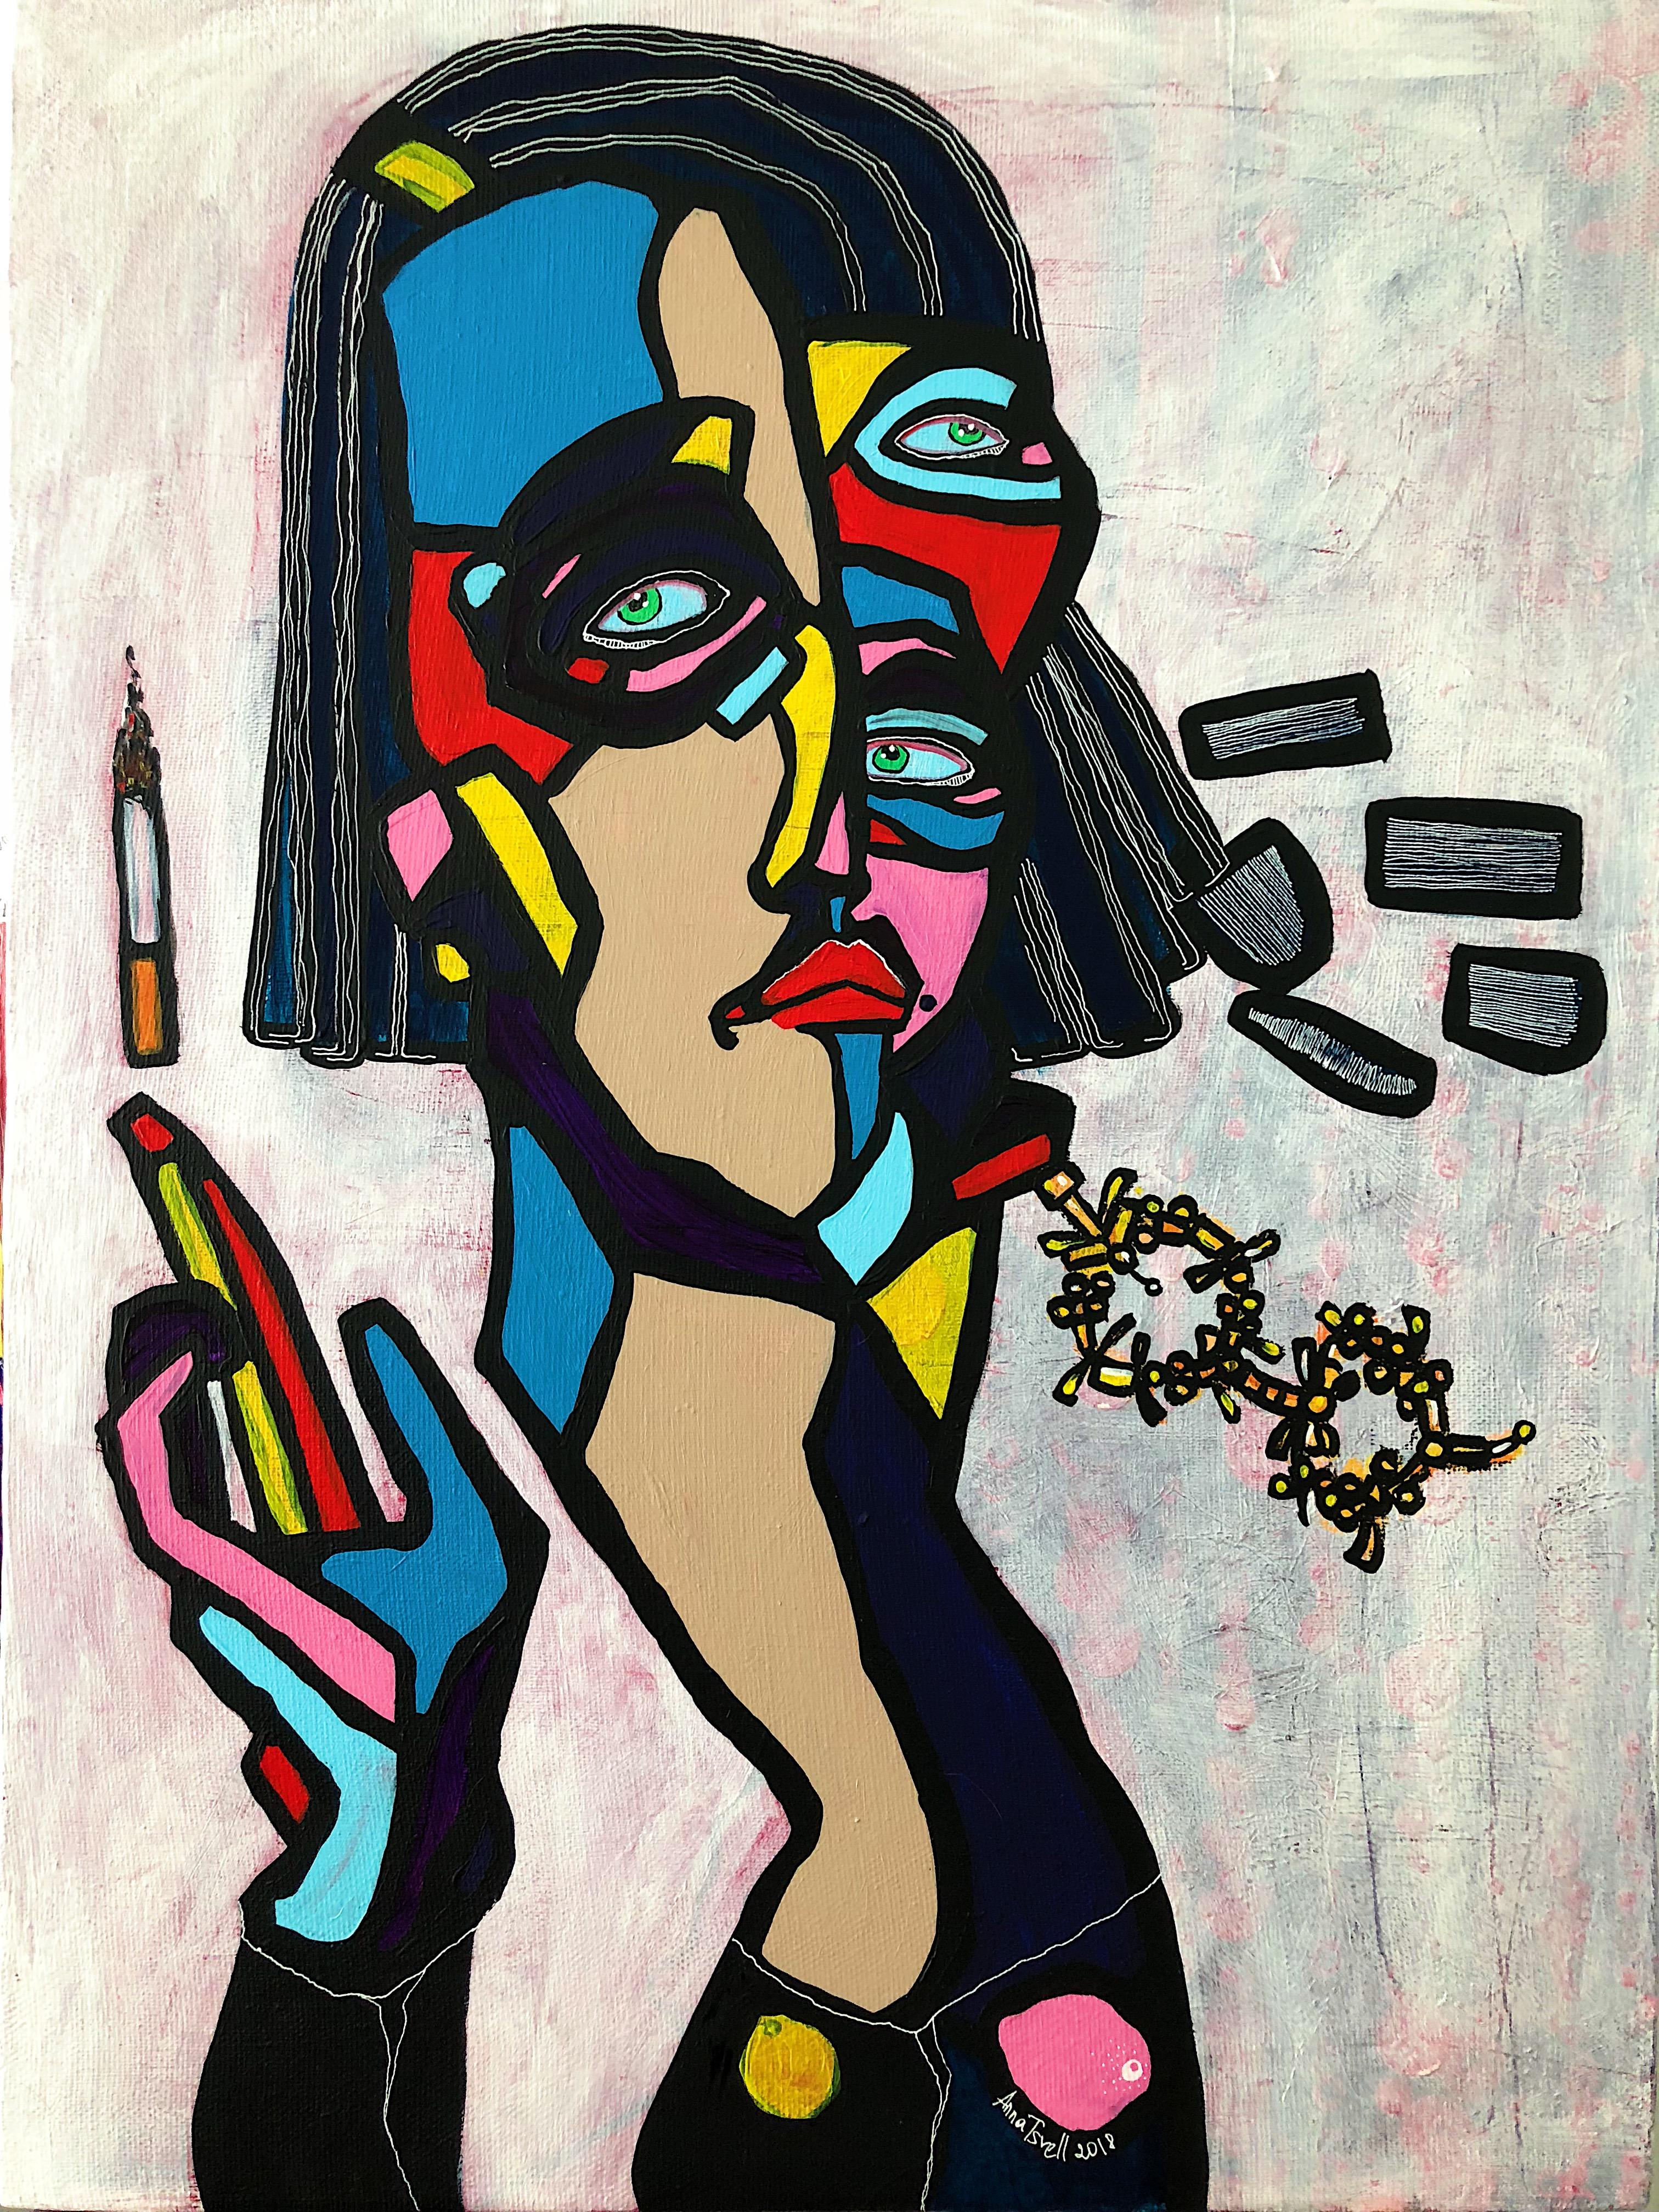 Anna Tsvell Abstract Painting - "Cigarette Levitation"